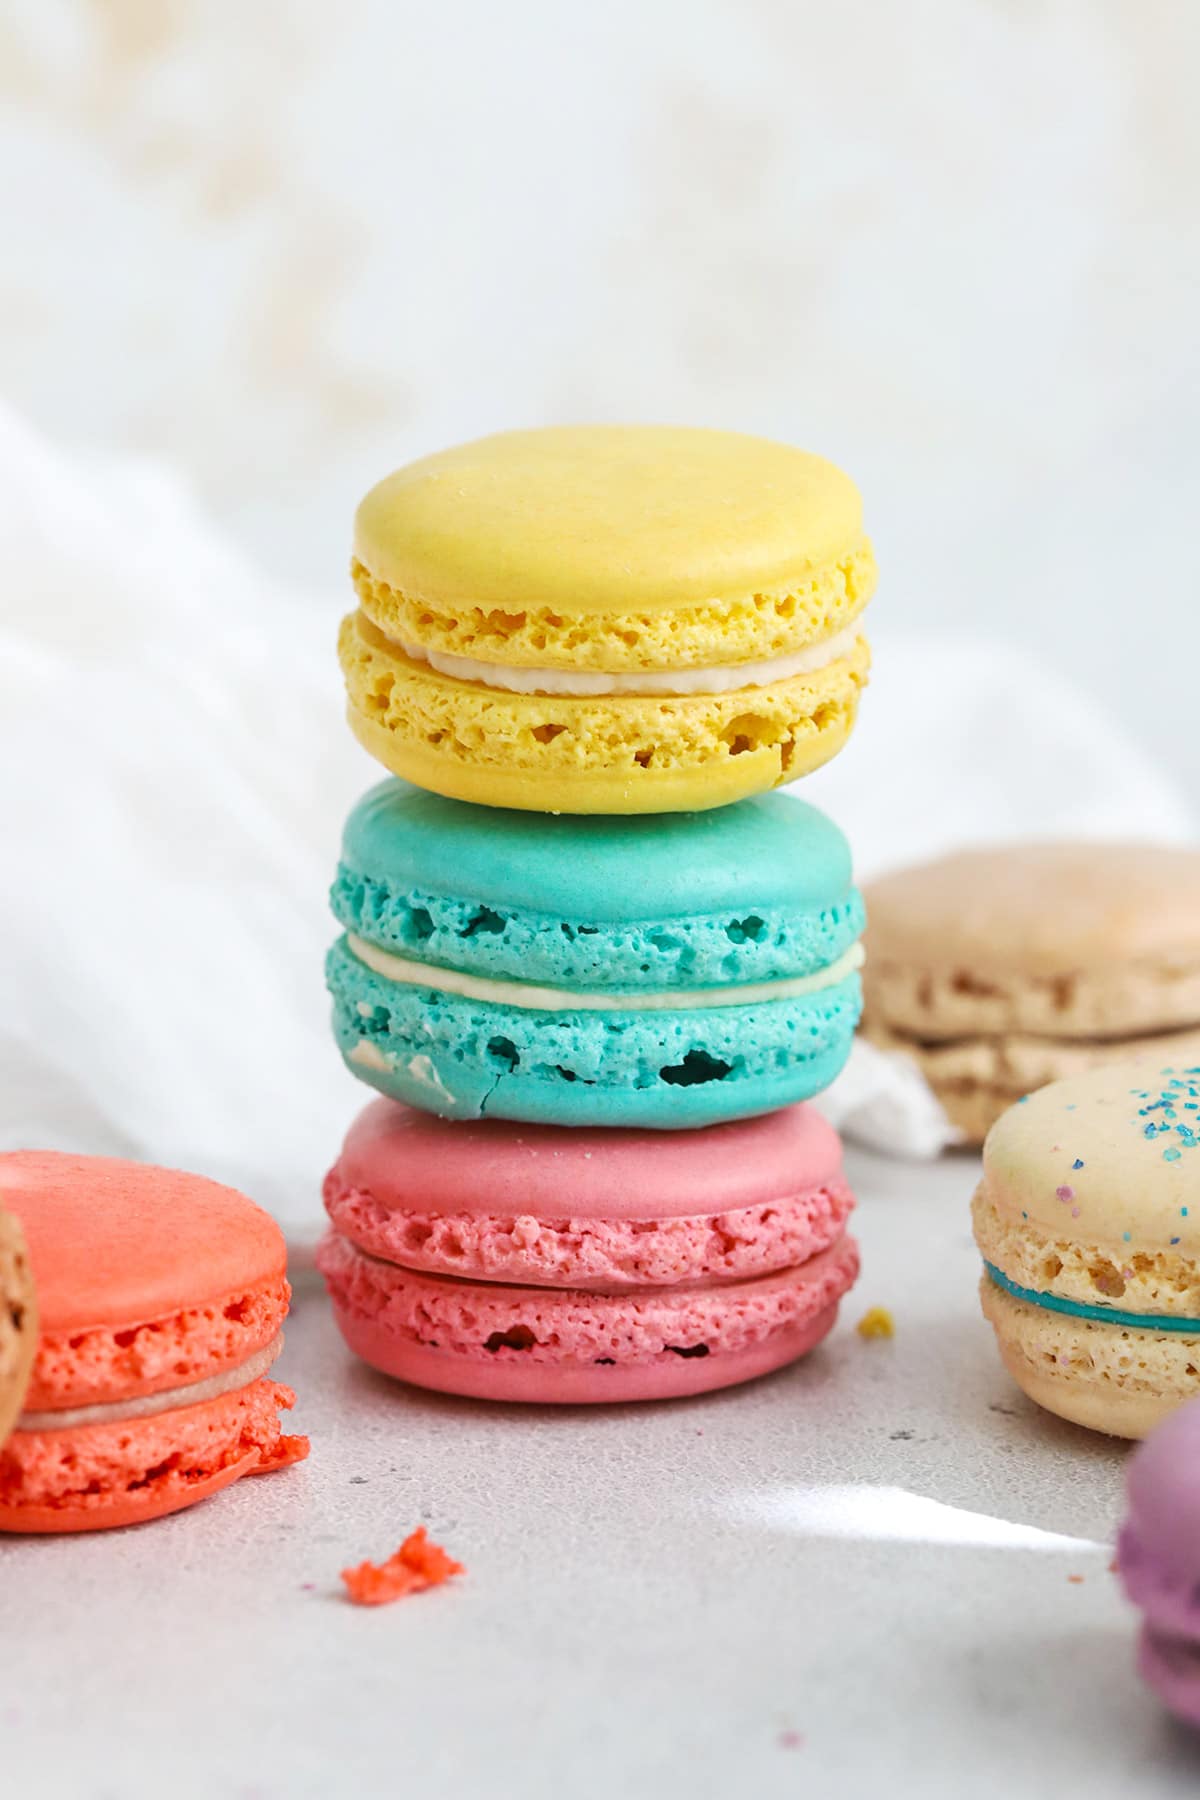 Front view of colorful macarons made with whipped egg whties